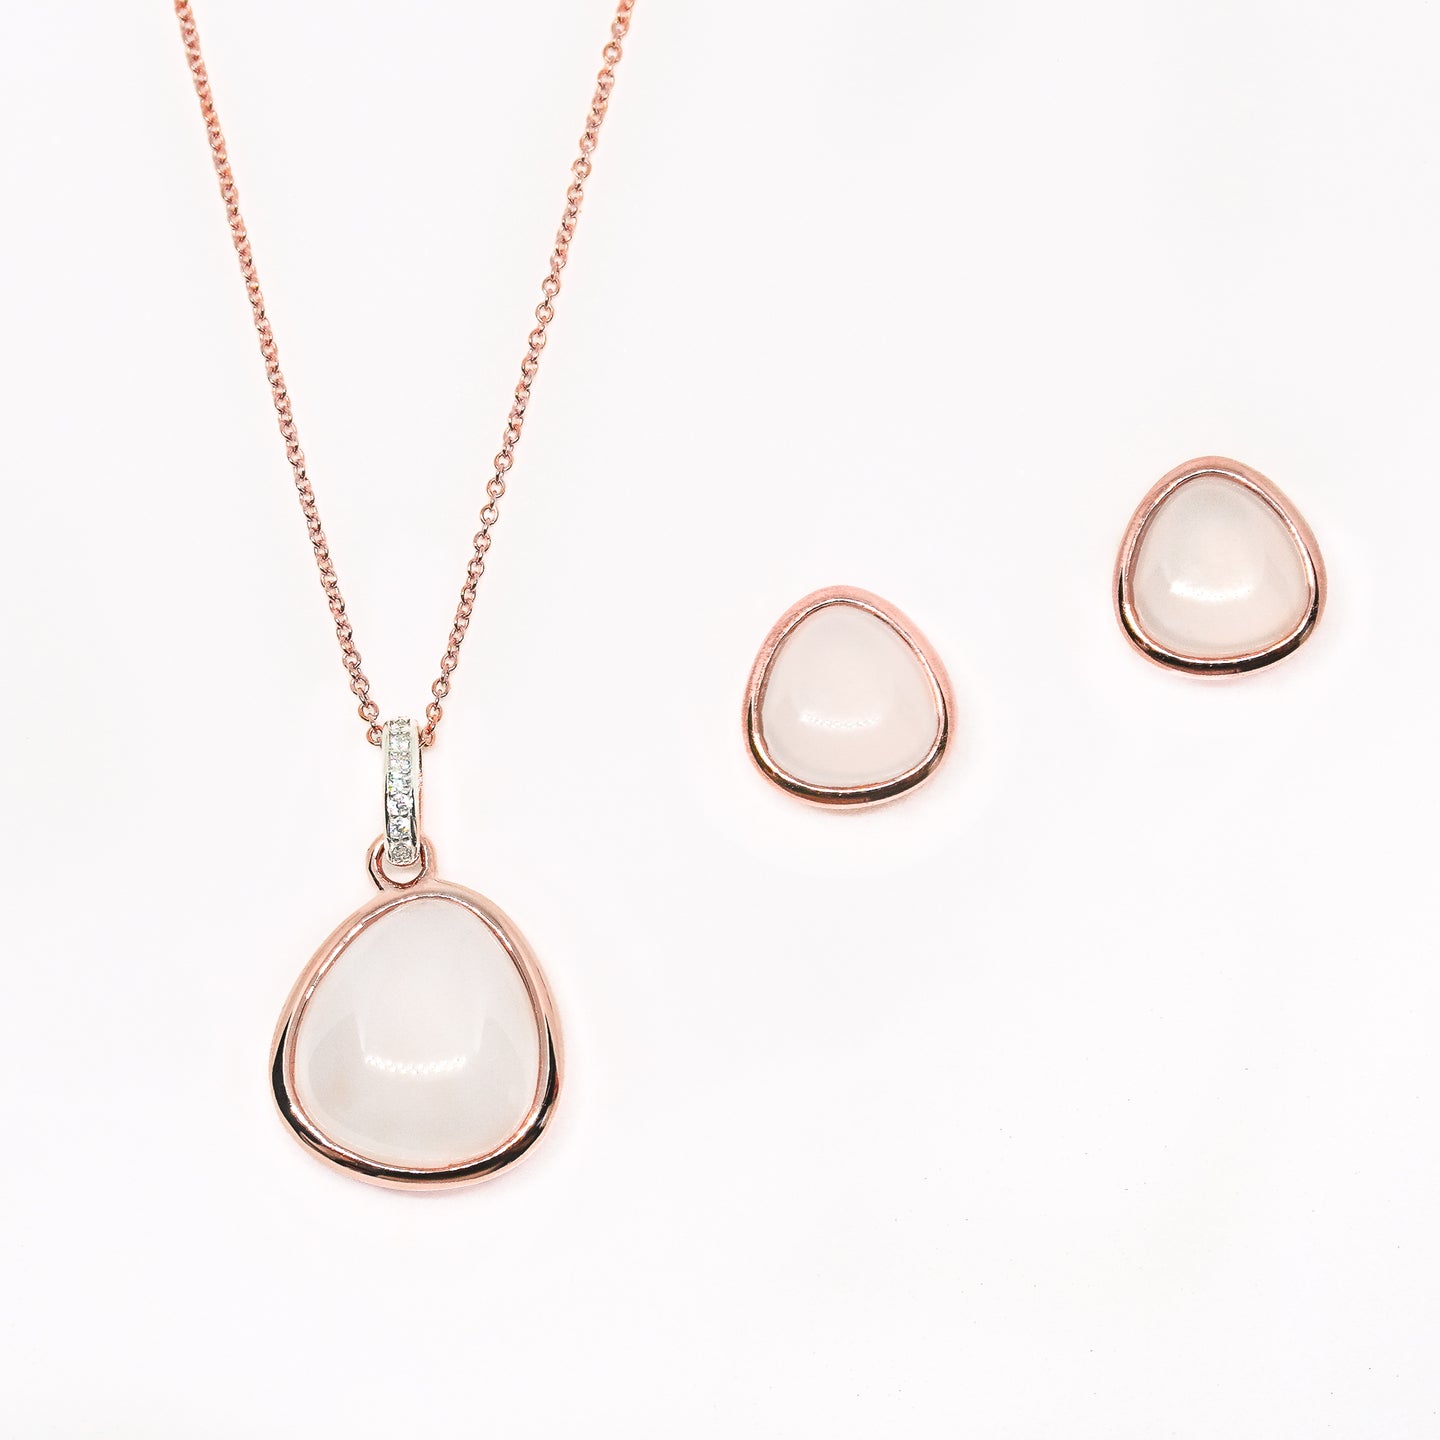 Agate Crystal Necklace and Earrings Set | Rose Gold Vermeil on Sterling Silver